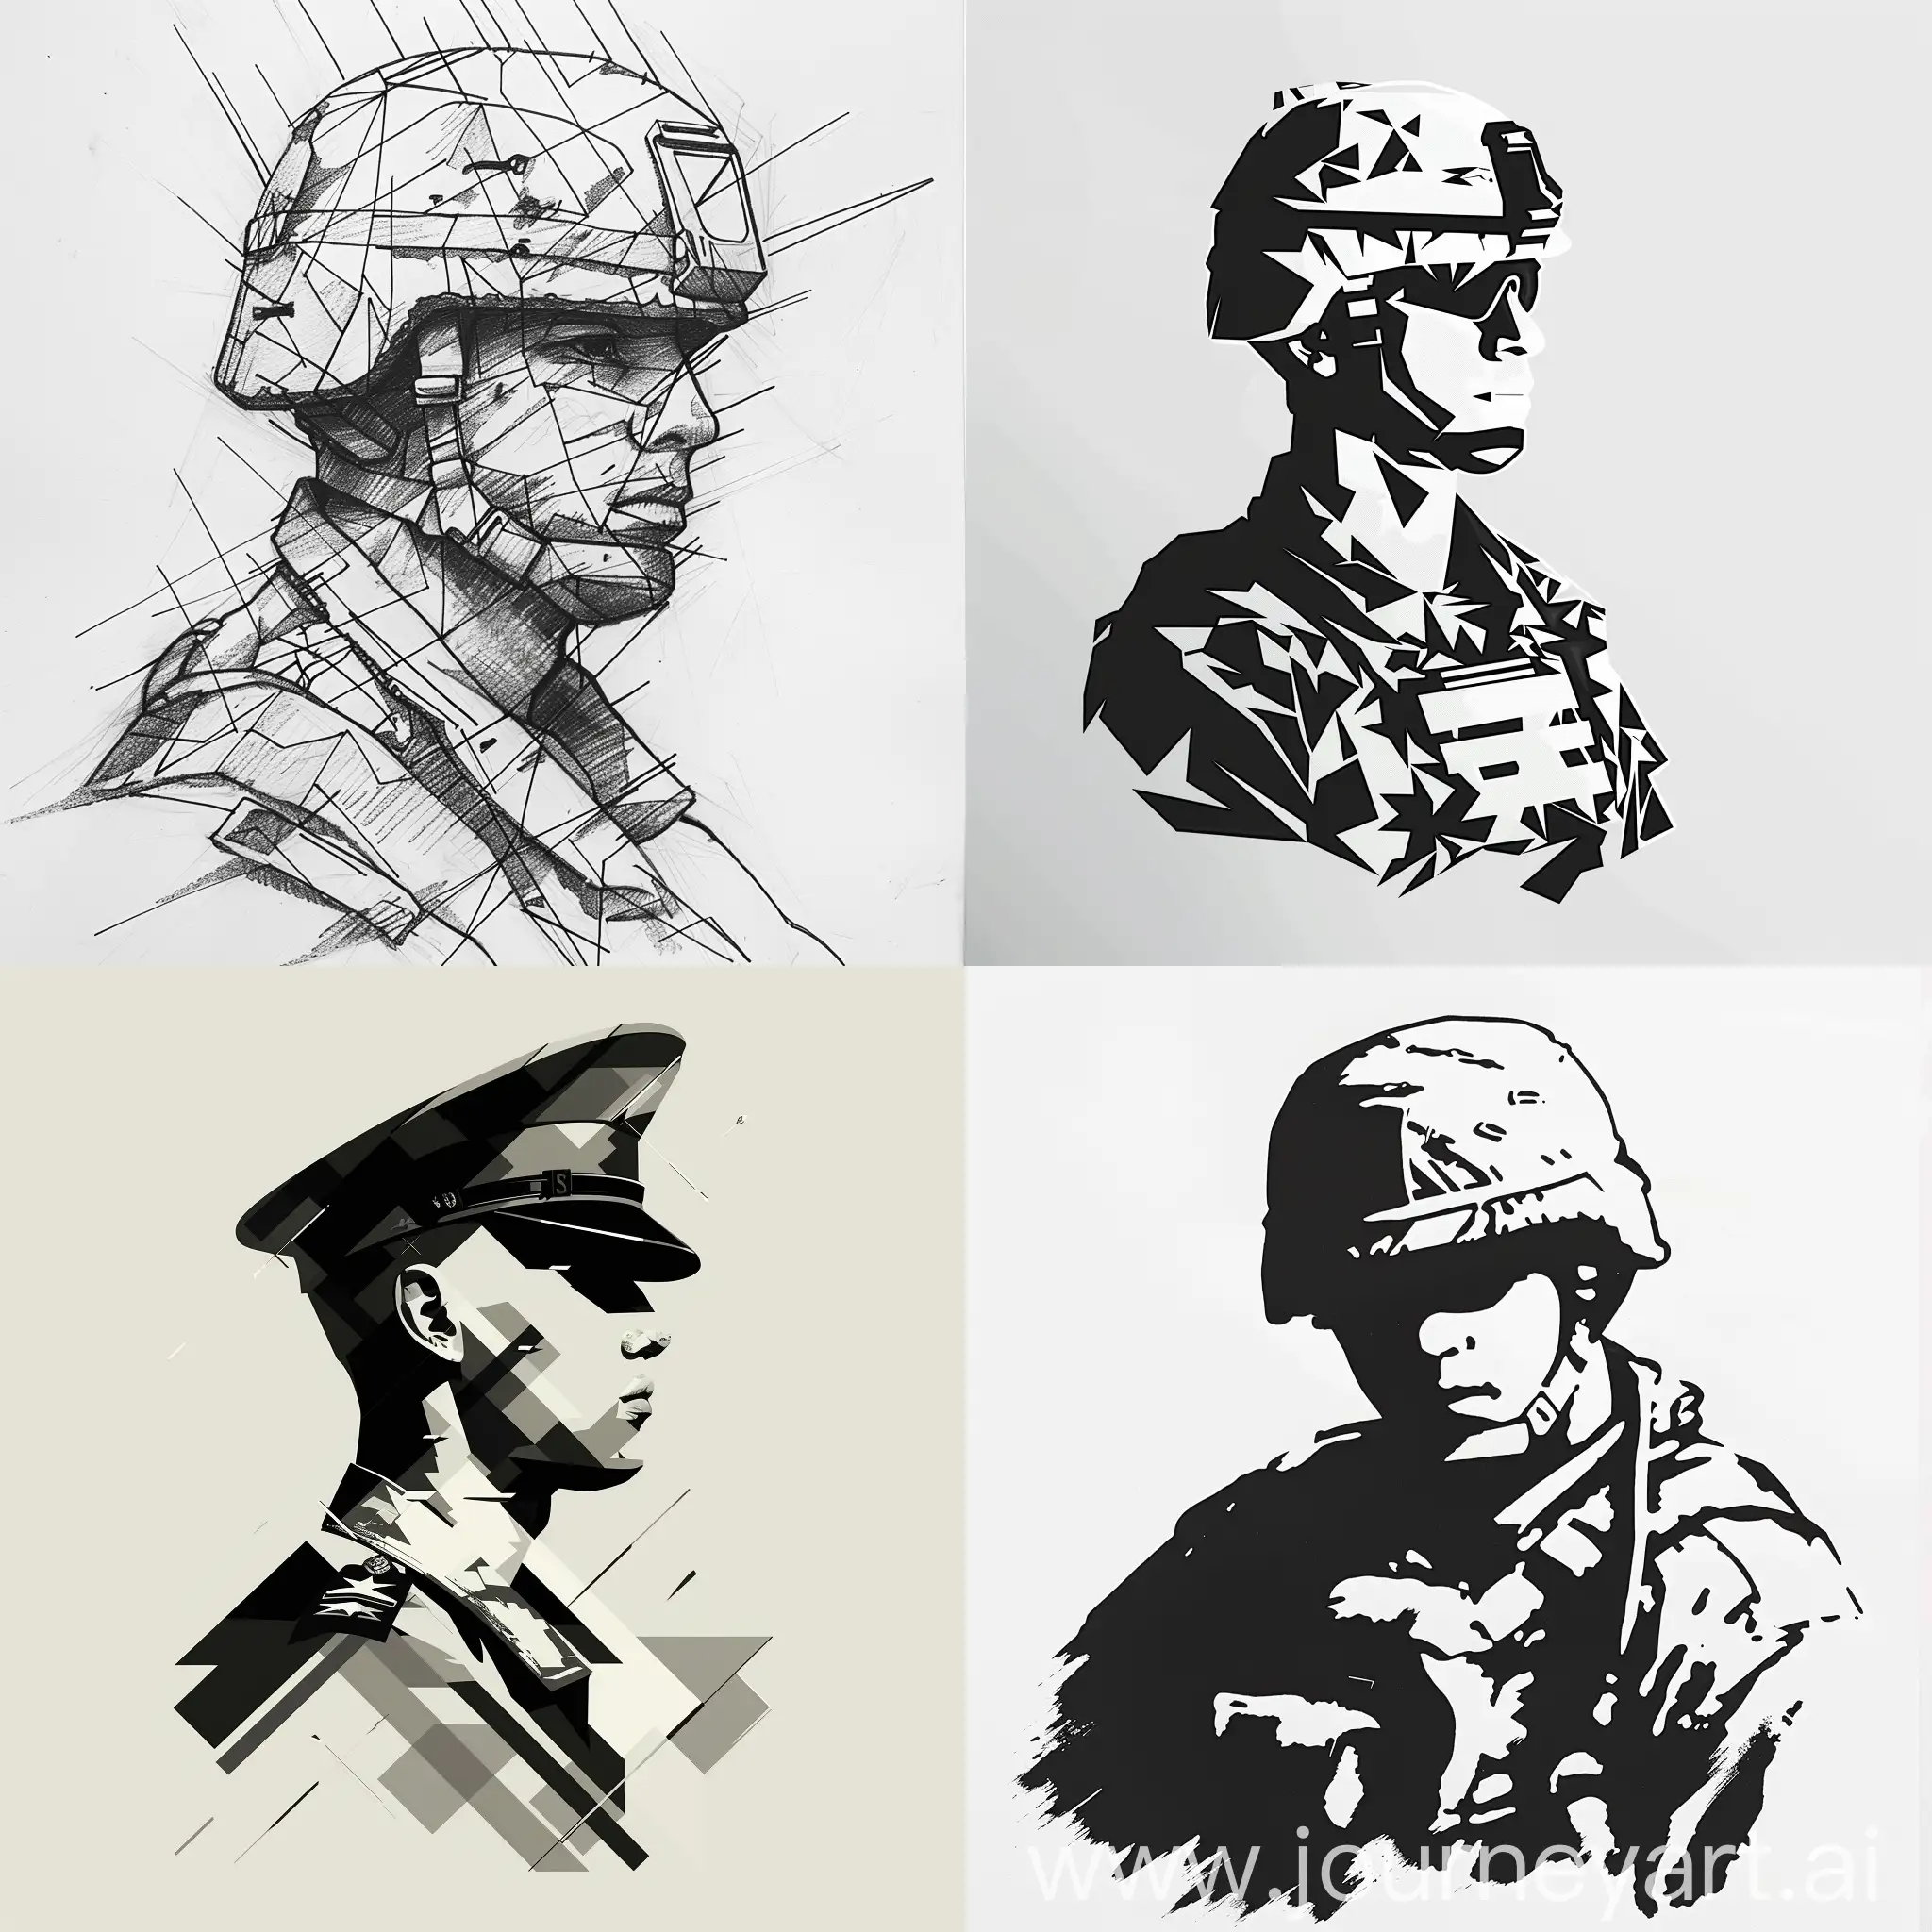 Contrasting-Emotions-Geometric-Soldier-Silhouette-Expressing-Rage-and-Calmness